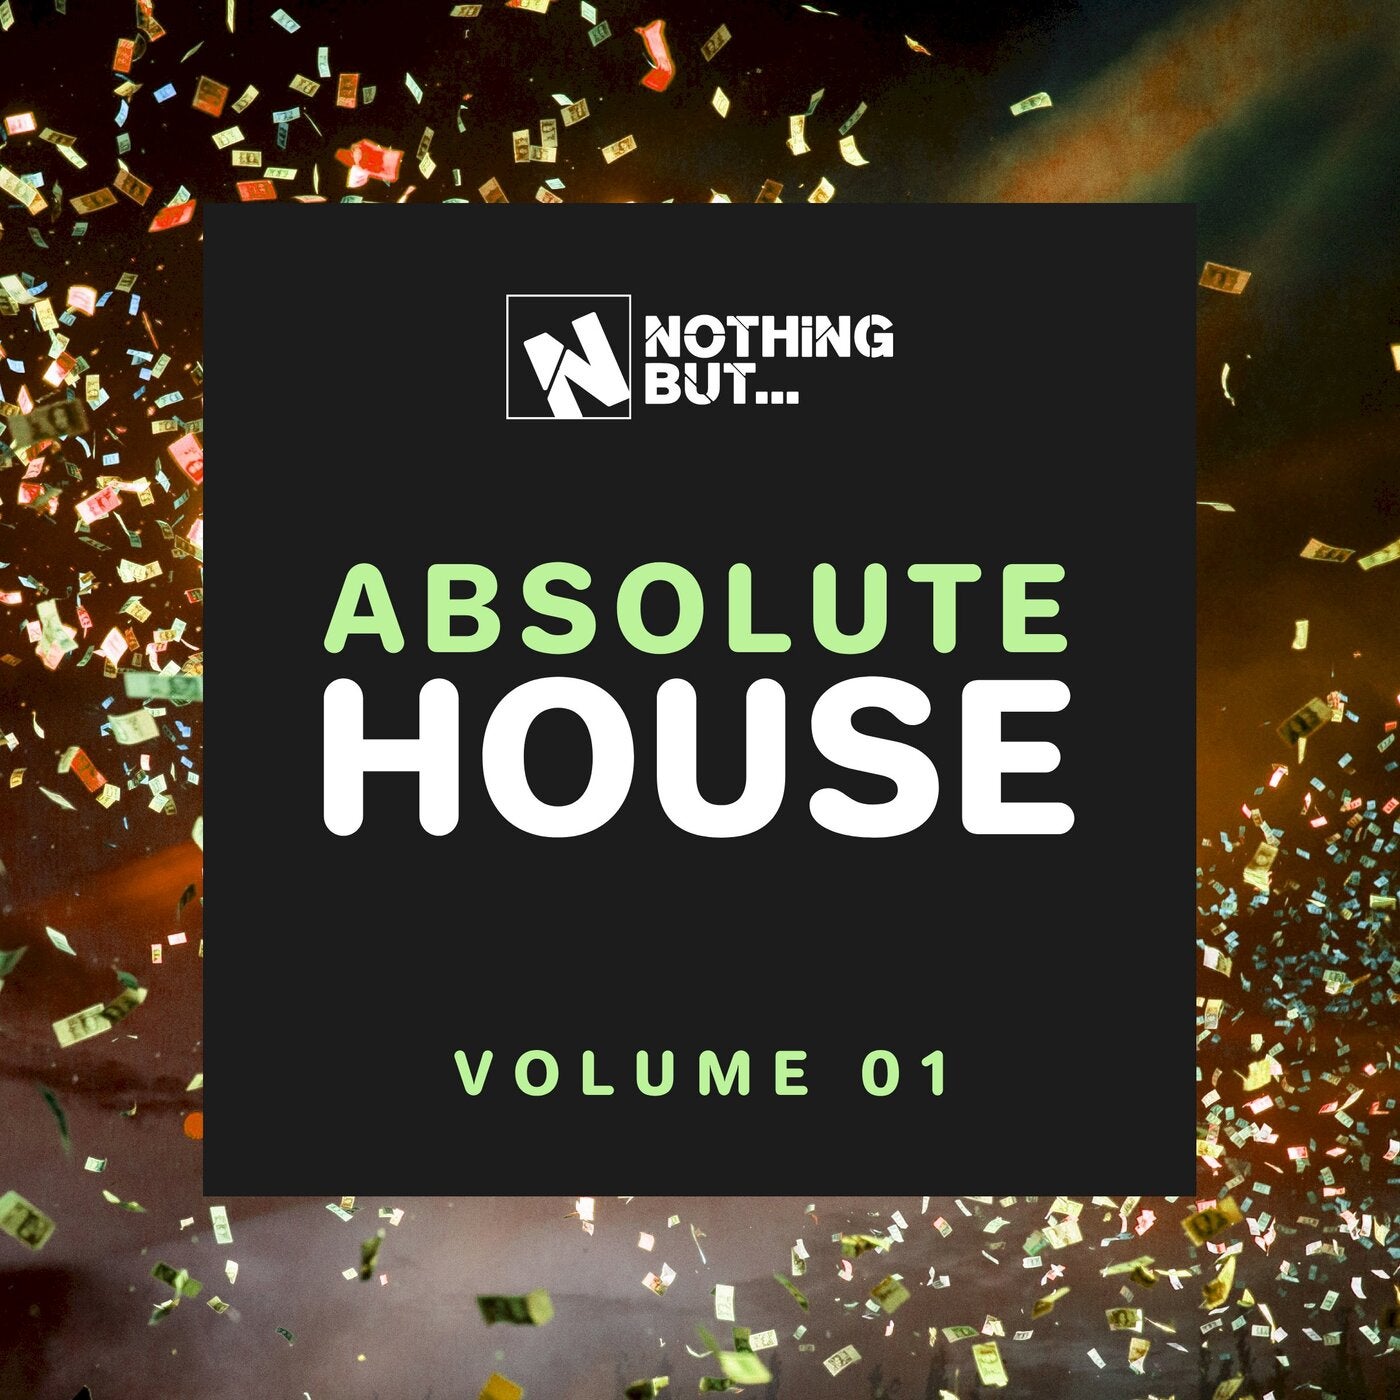 VA – Nothing But… Absolute House, Vol. 01 [NBABHS01]